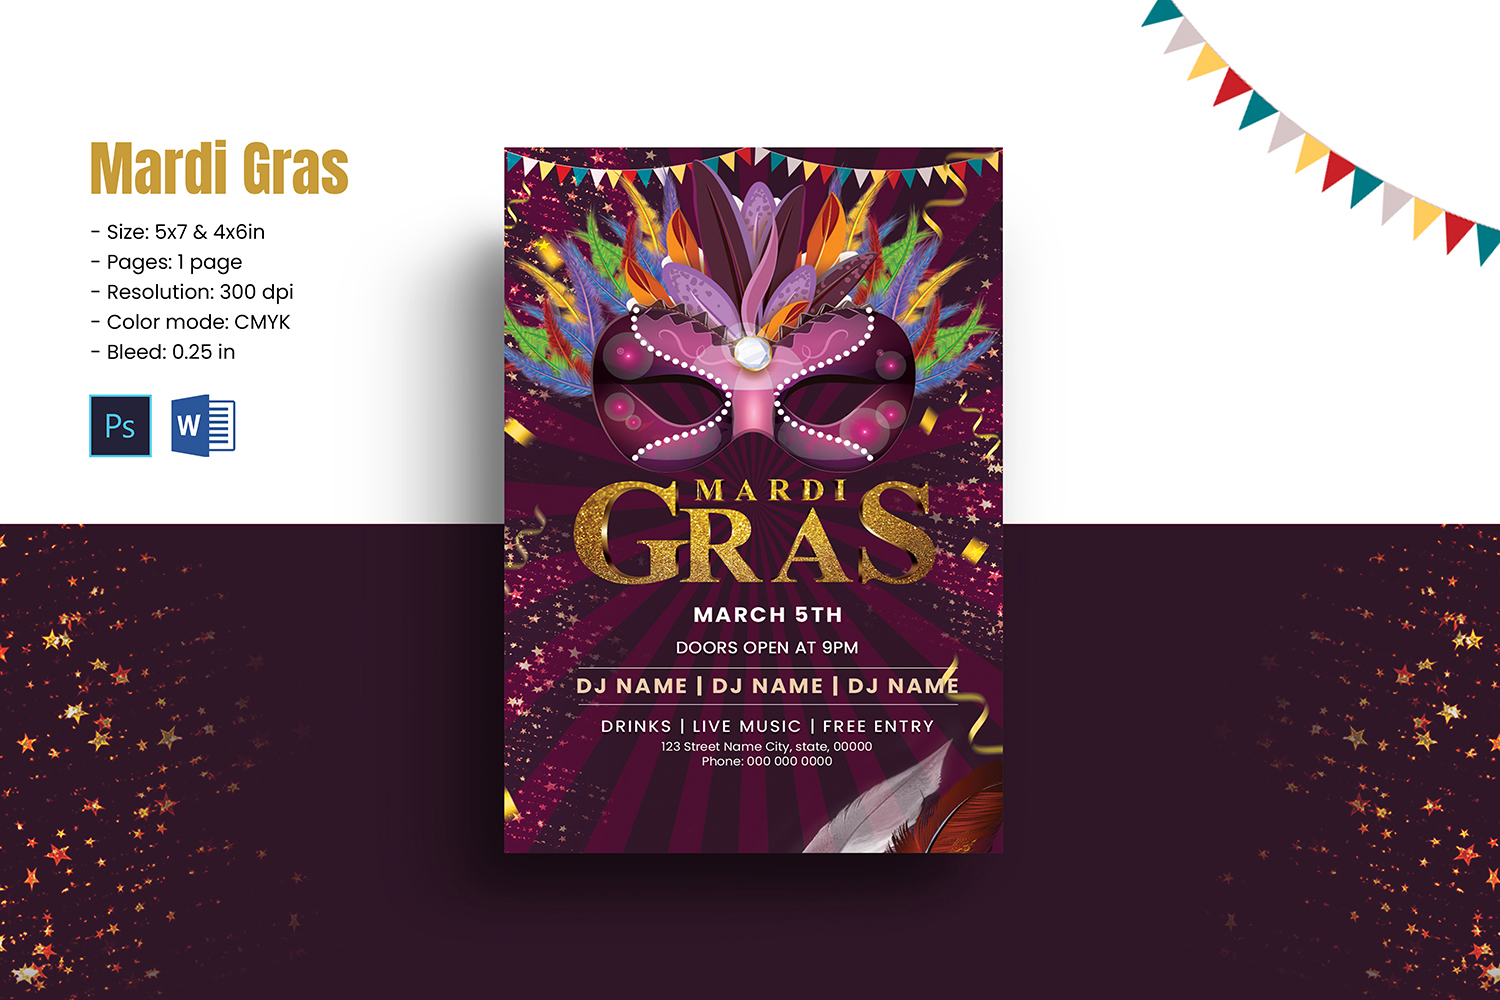 Mardi Gras Party Invitation Flyer Template. Word and Psd